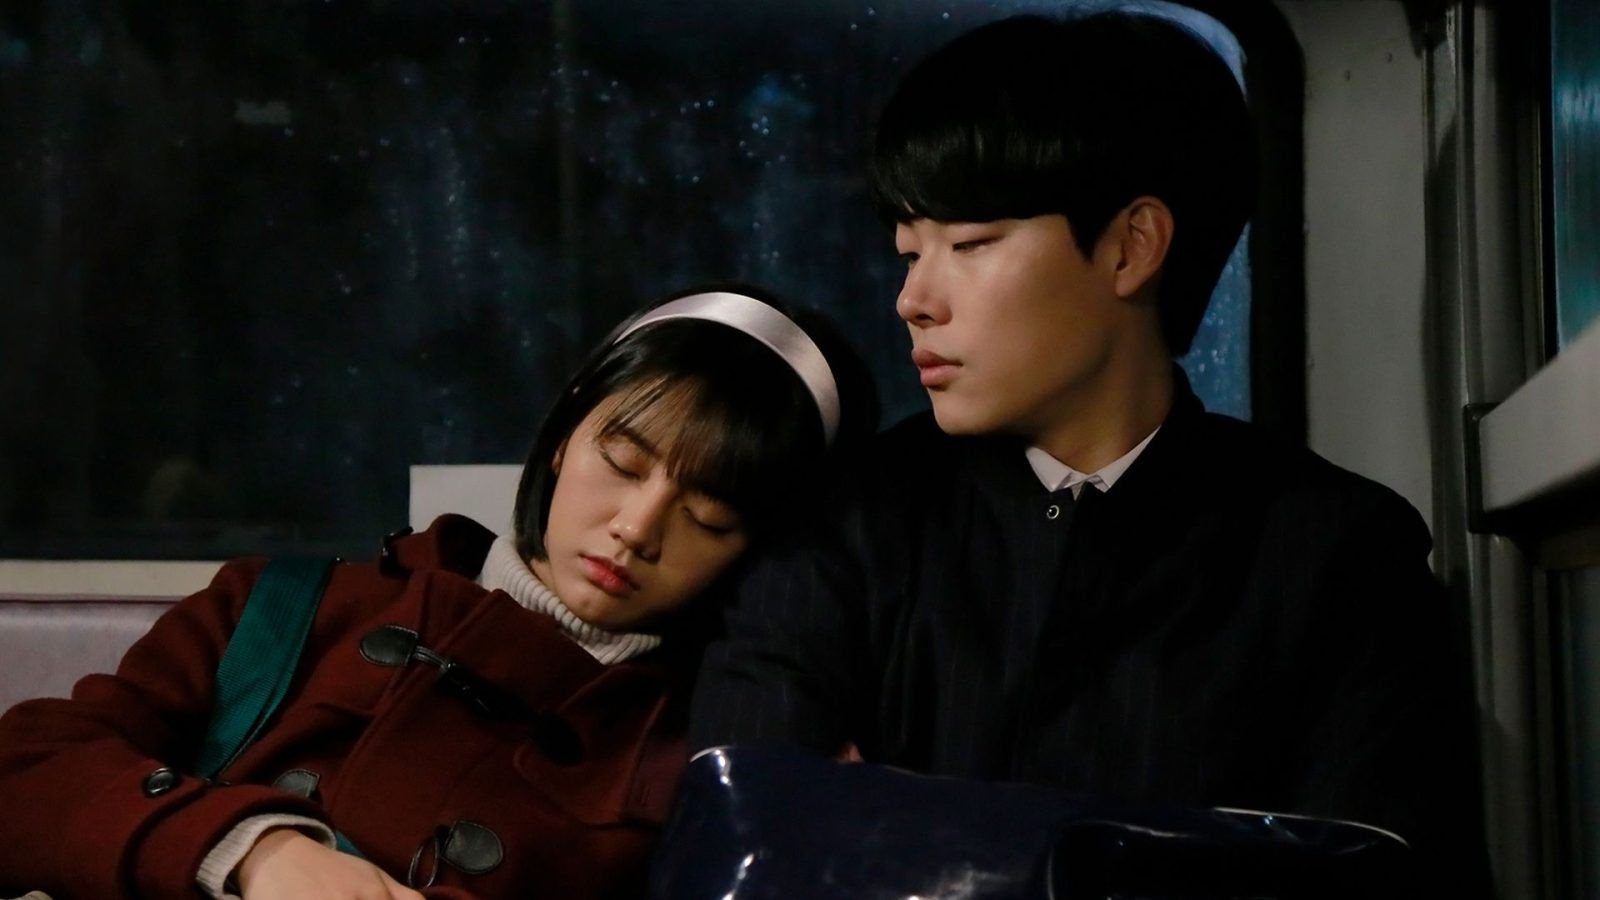 Reply 1988' co-stars Hyeri and Ryu Jun-yeol end their six-year relationship